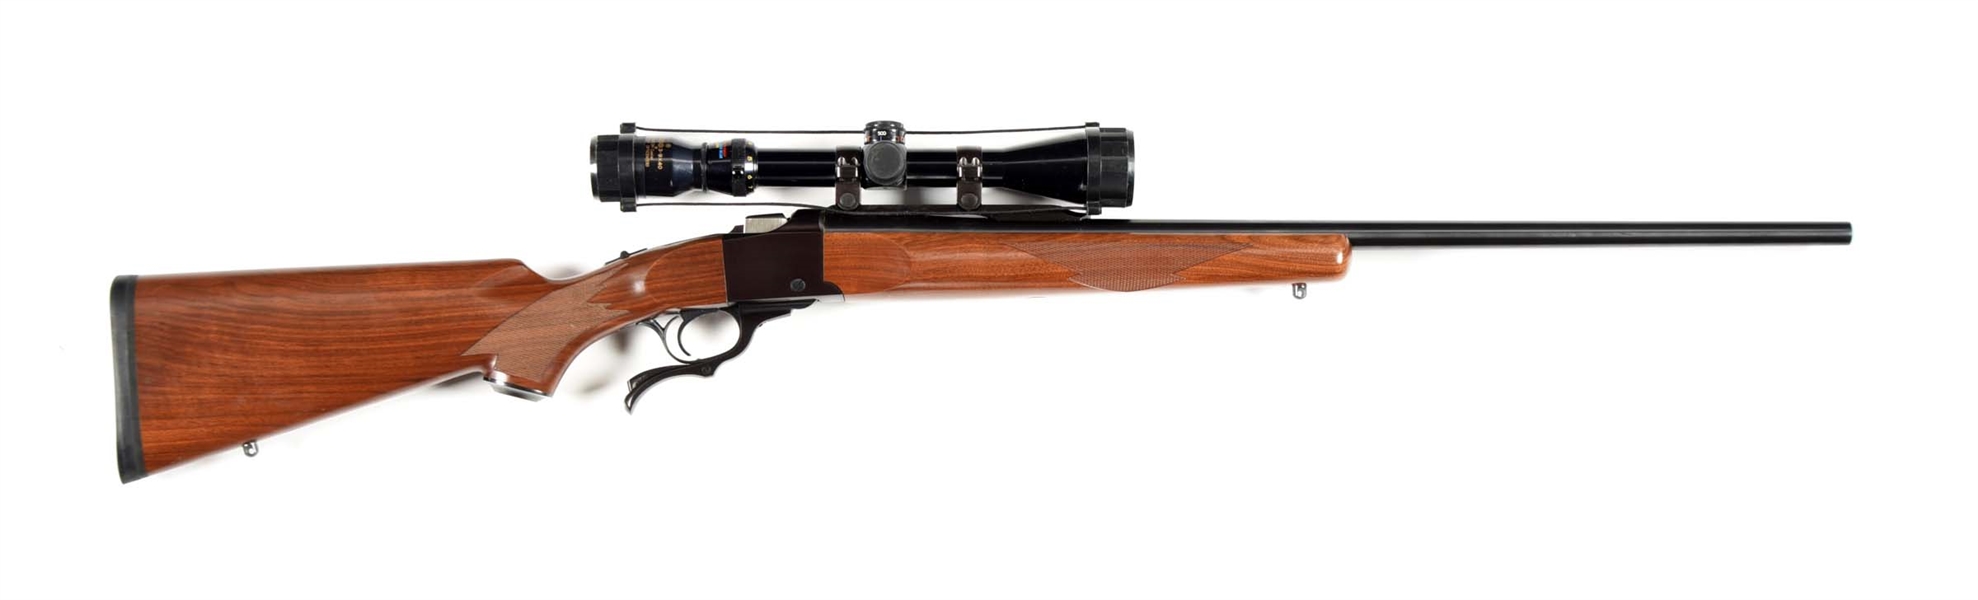 (M) RUGER NO. 1 SINGLE SHOT RIFLE IN .30-06.